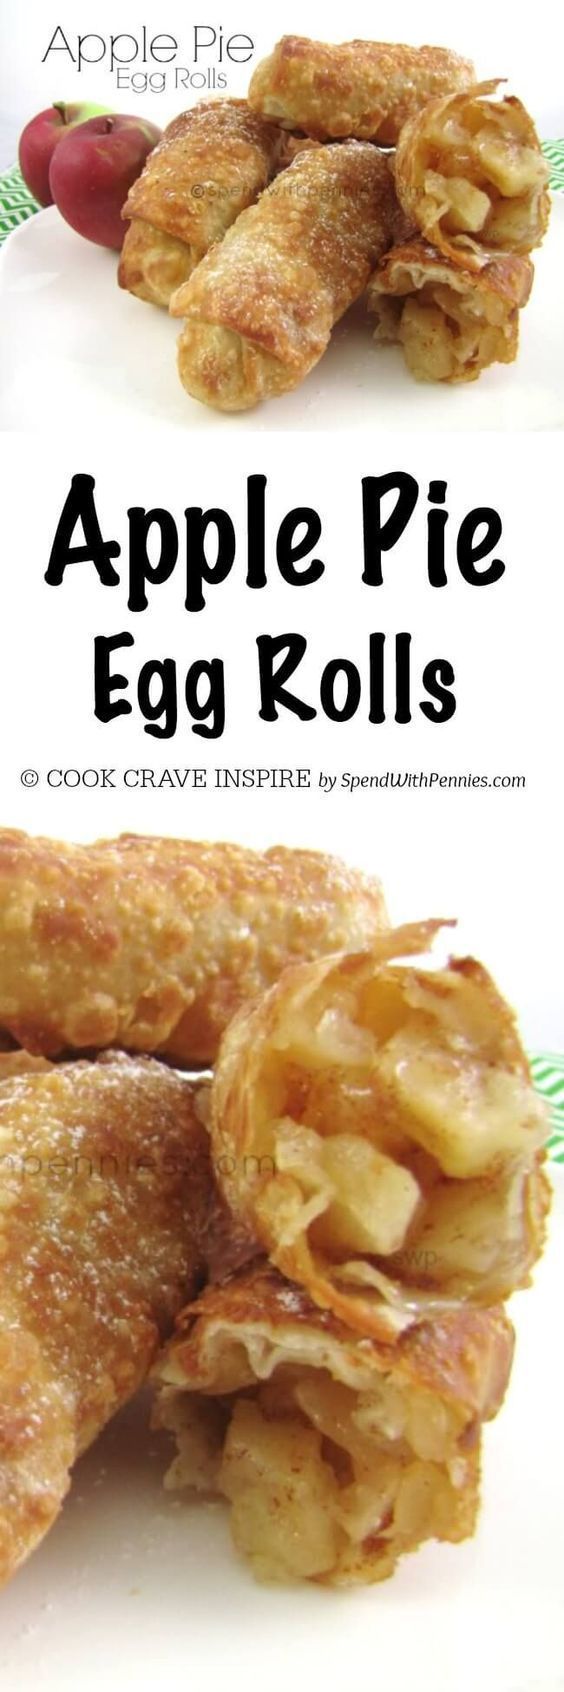 Apple Pie Egg Rolls!! If you like the OLD McDonalds apple pies (the fried ones!) you will LOVE these! Crispy shells with a warm